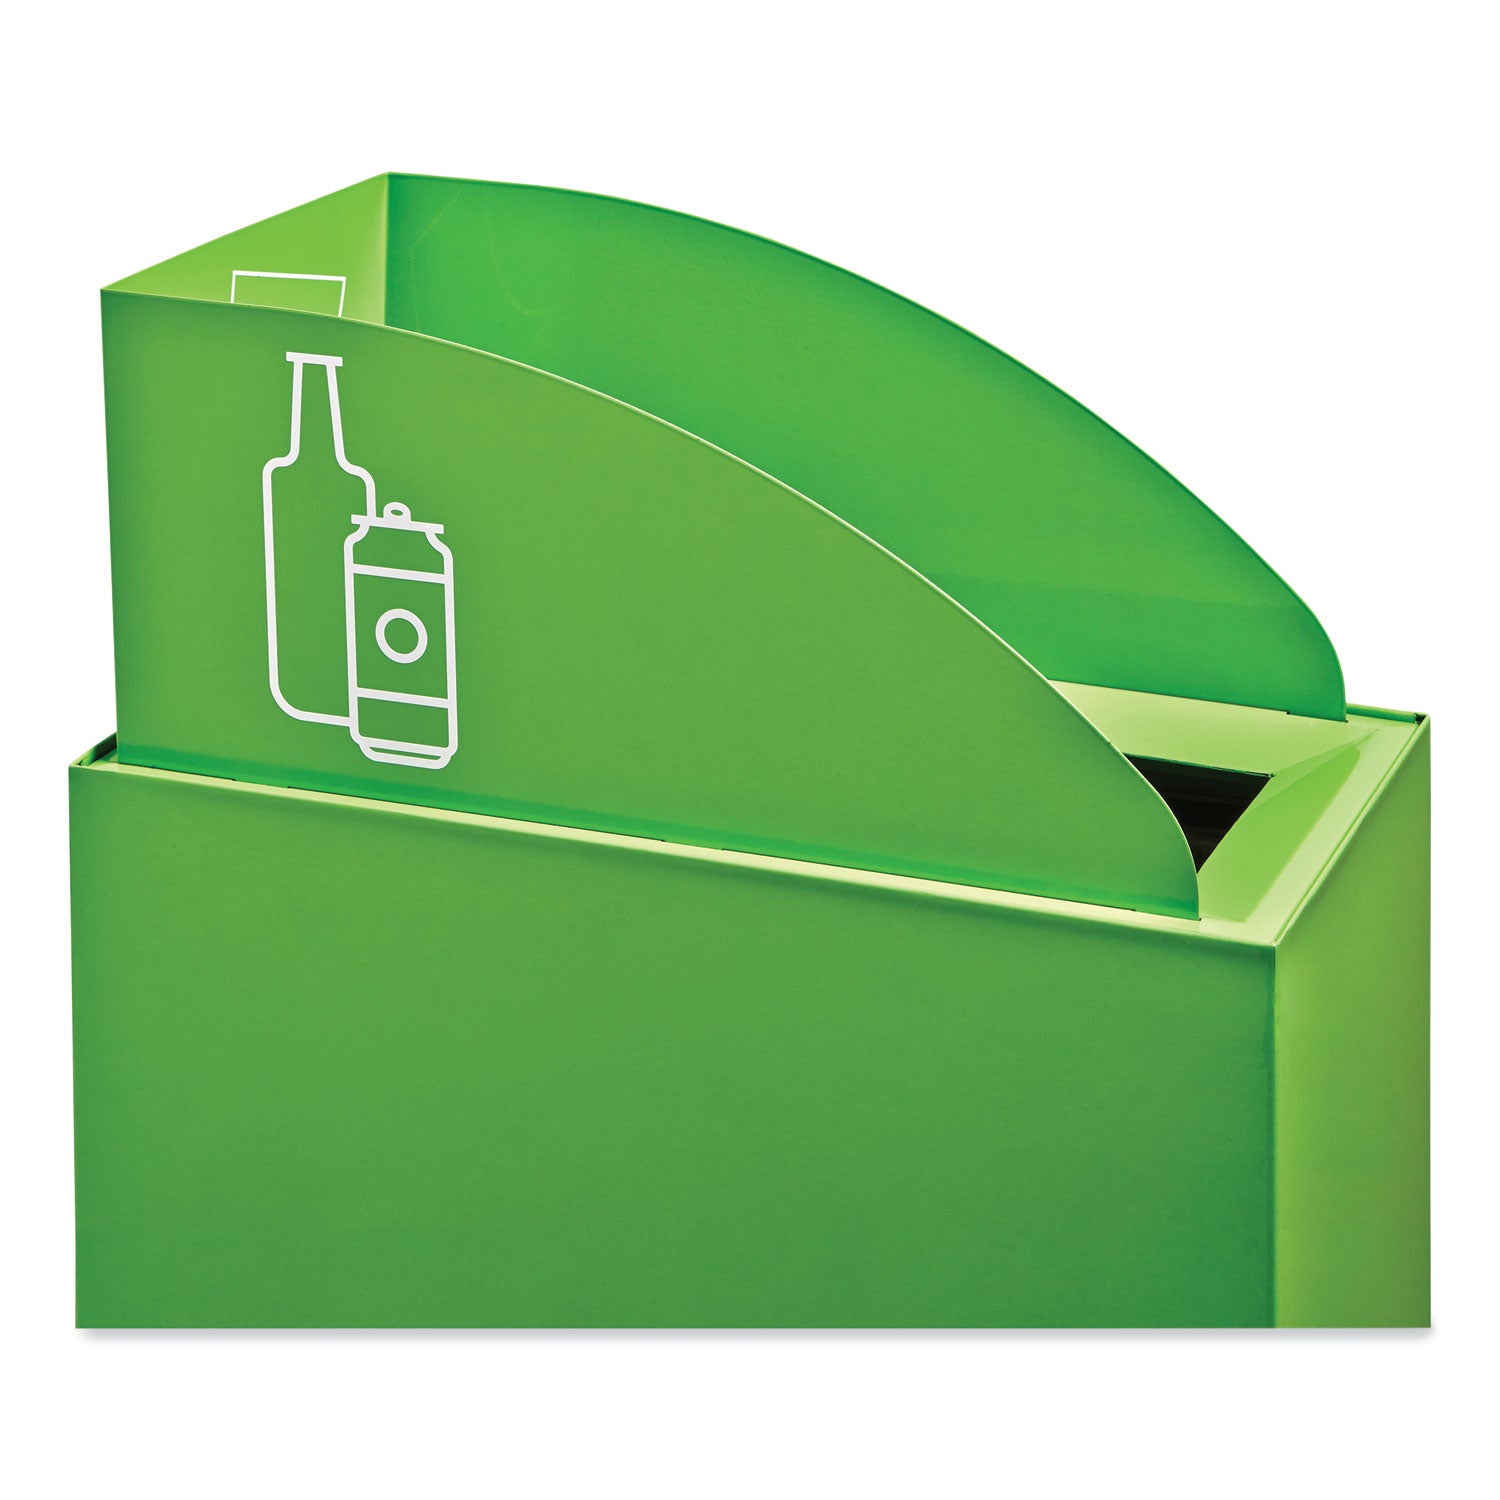 mixx-recycling-center-lid-topper-style-987w-x-1987d-x-062h-green-ships-in-1-3-business-days_saf9449gn - 5